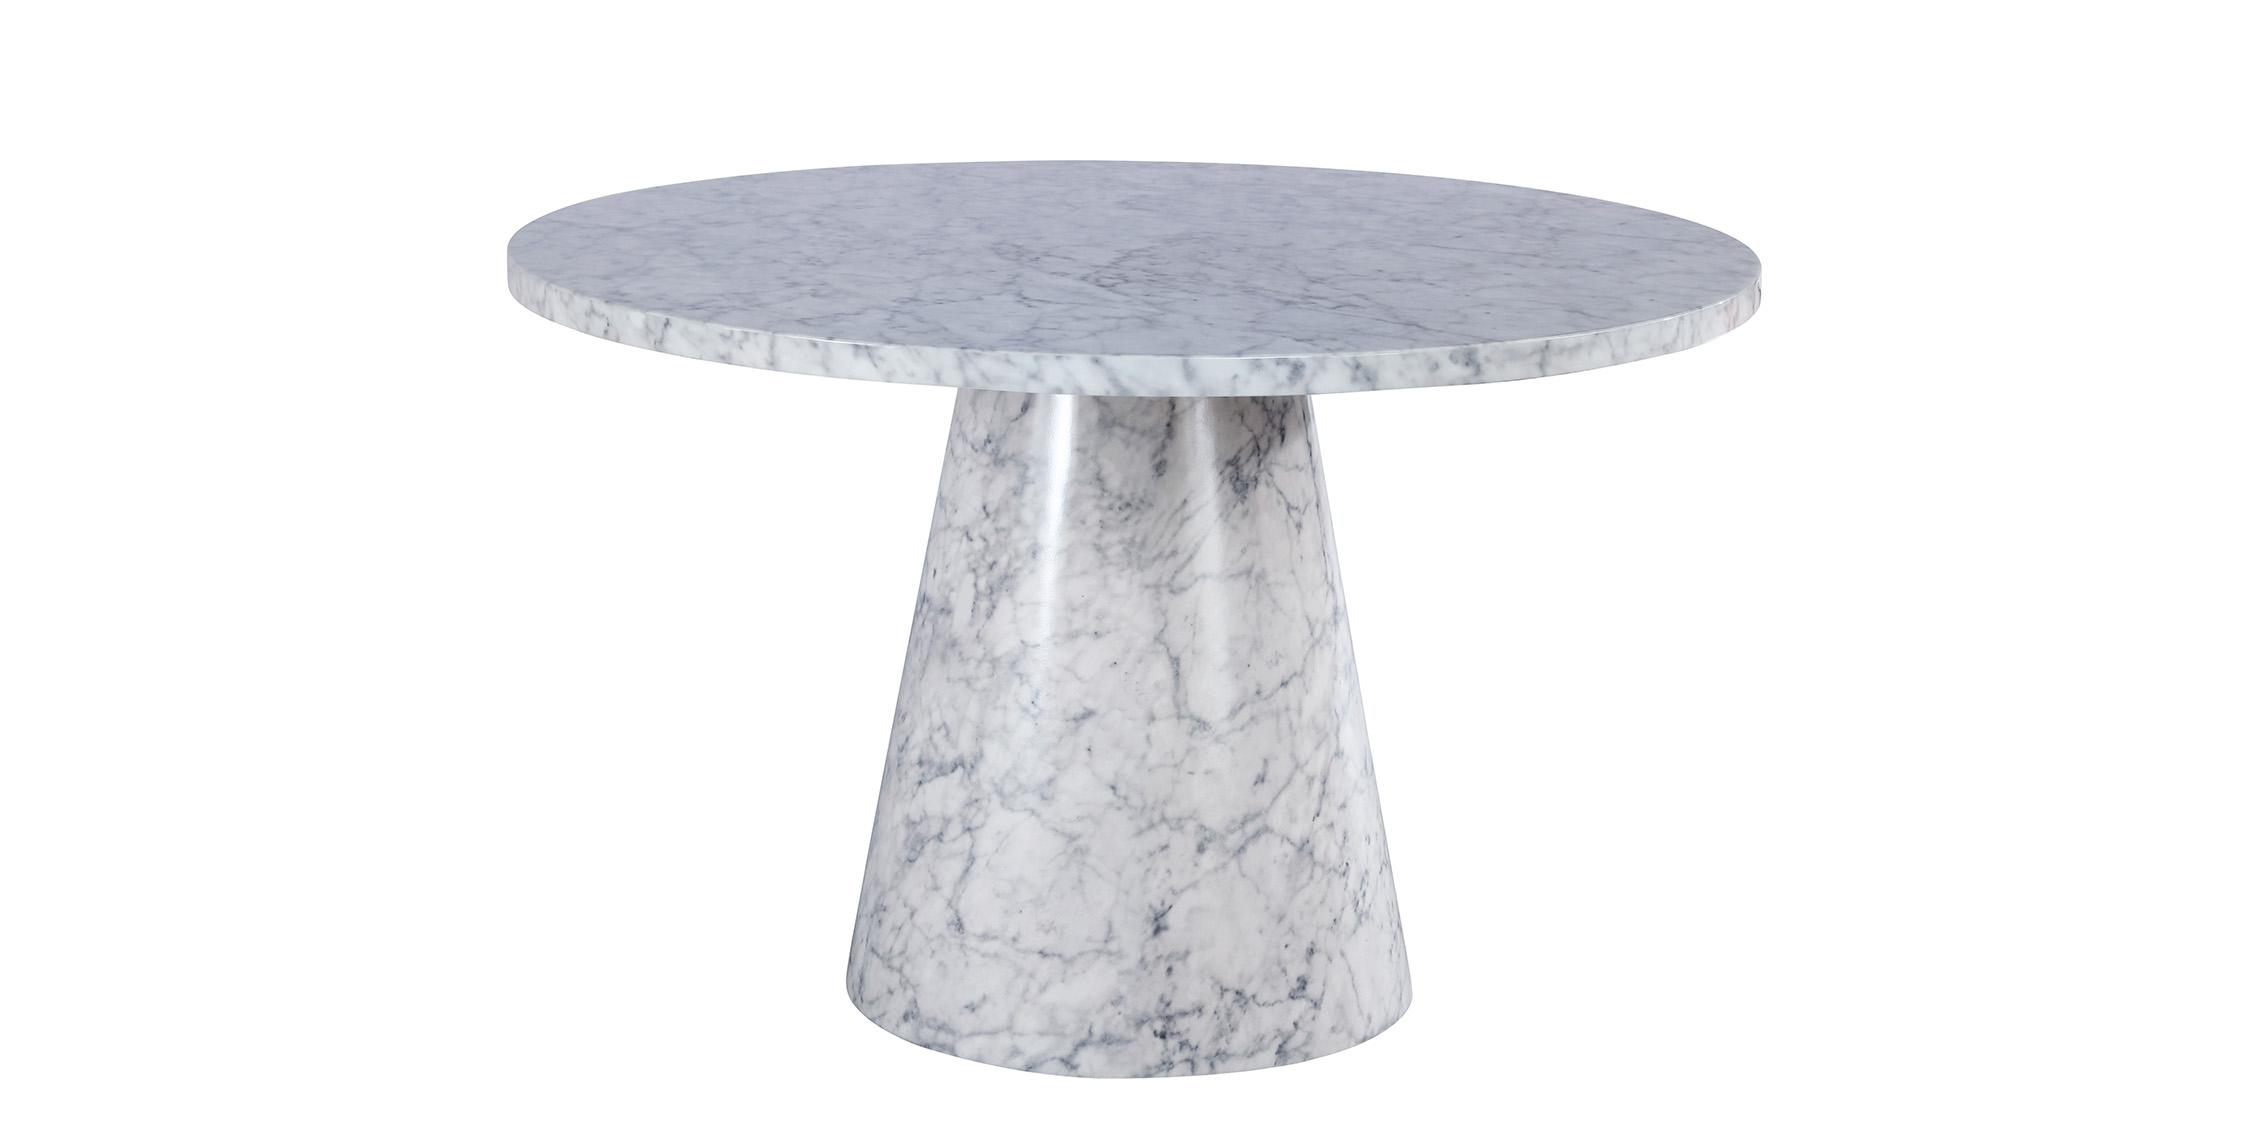 Contemporary, Modern Dining Table OMNI 921-T 921-T in White, Gray 